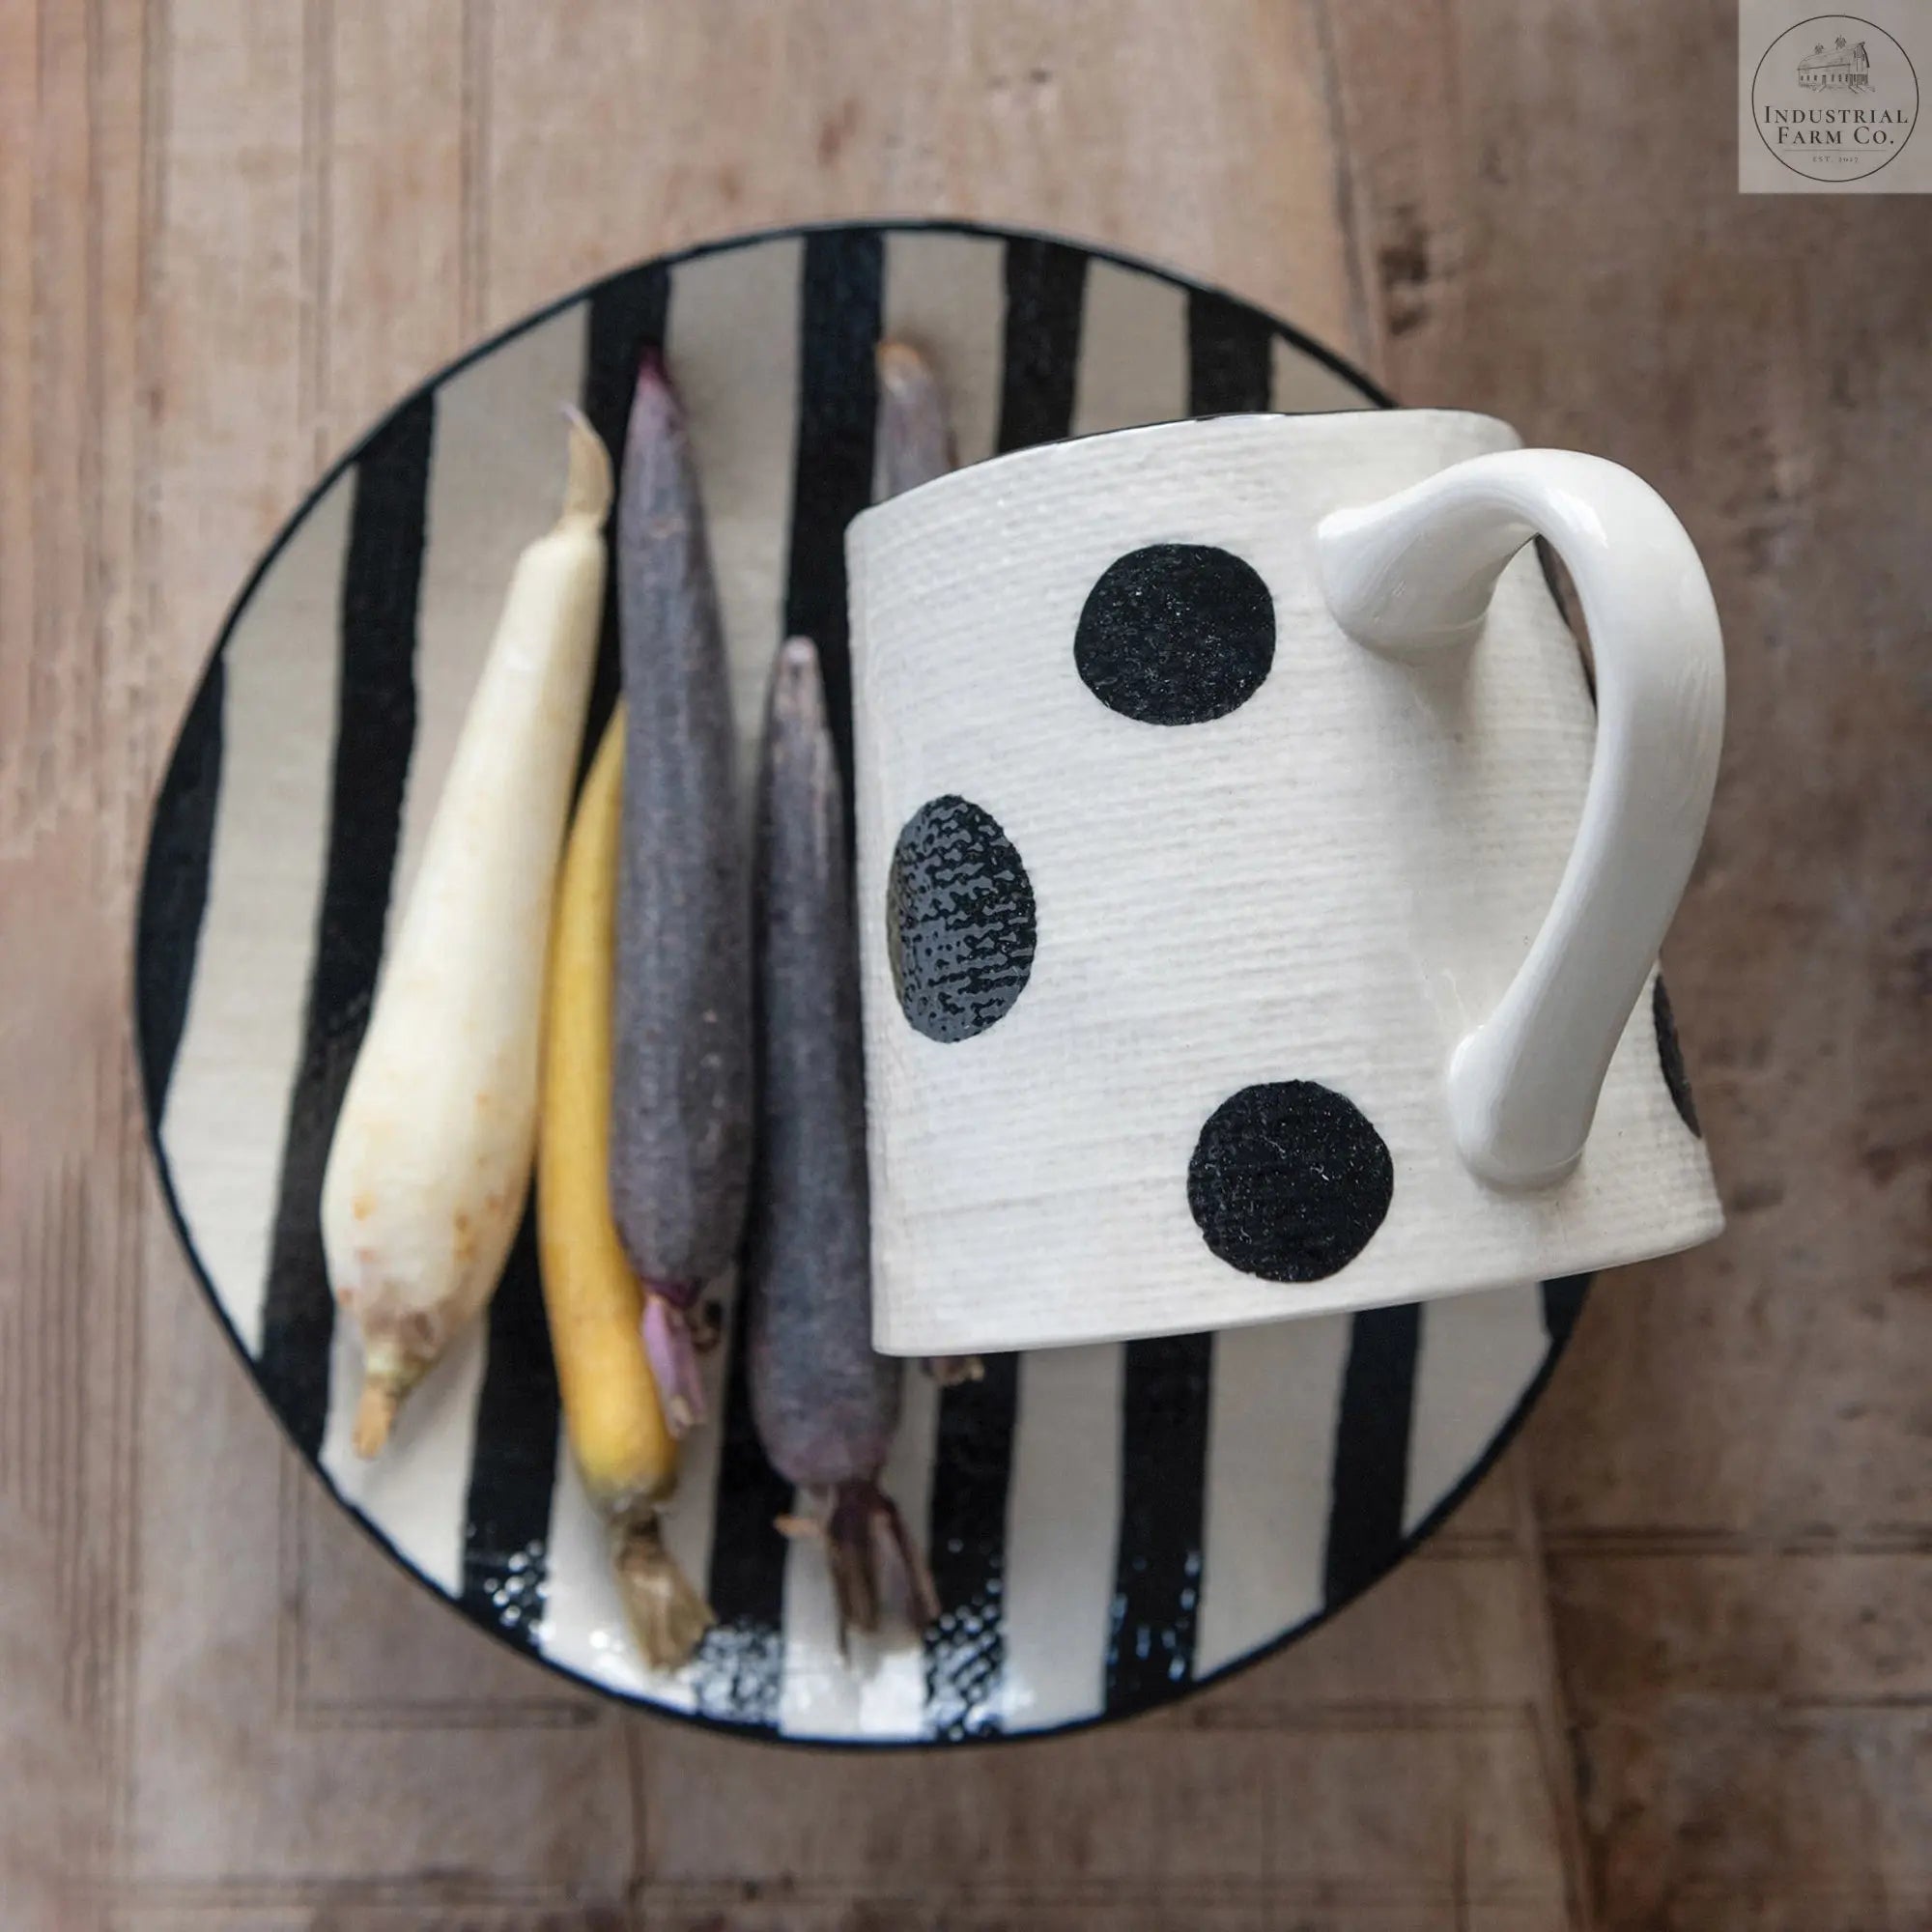 The Walker Hand Painted Plate  Dots   | Industrial Farm Co